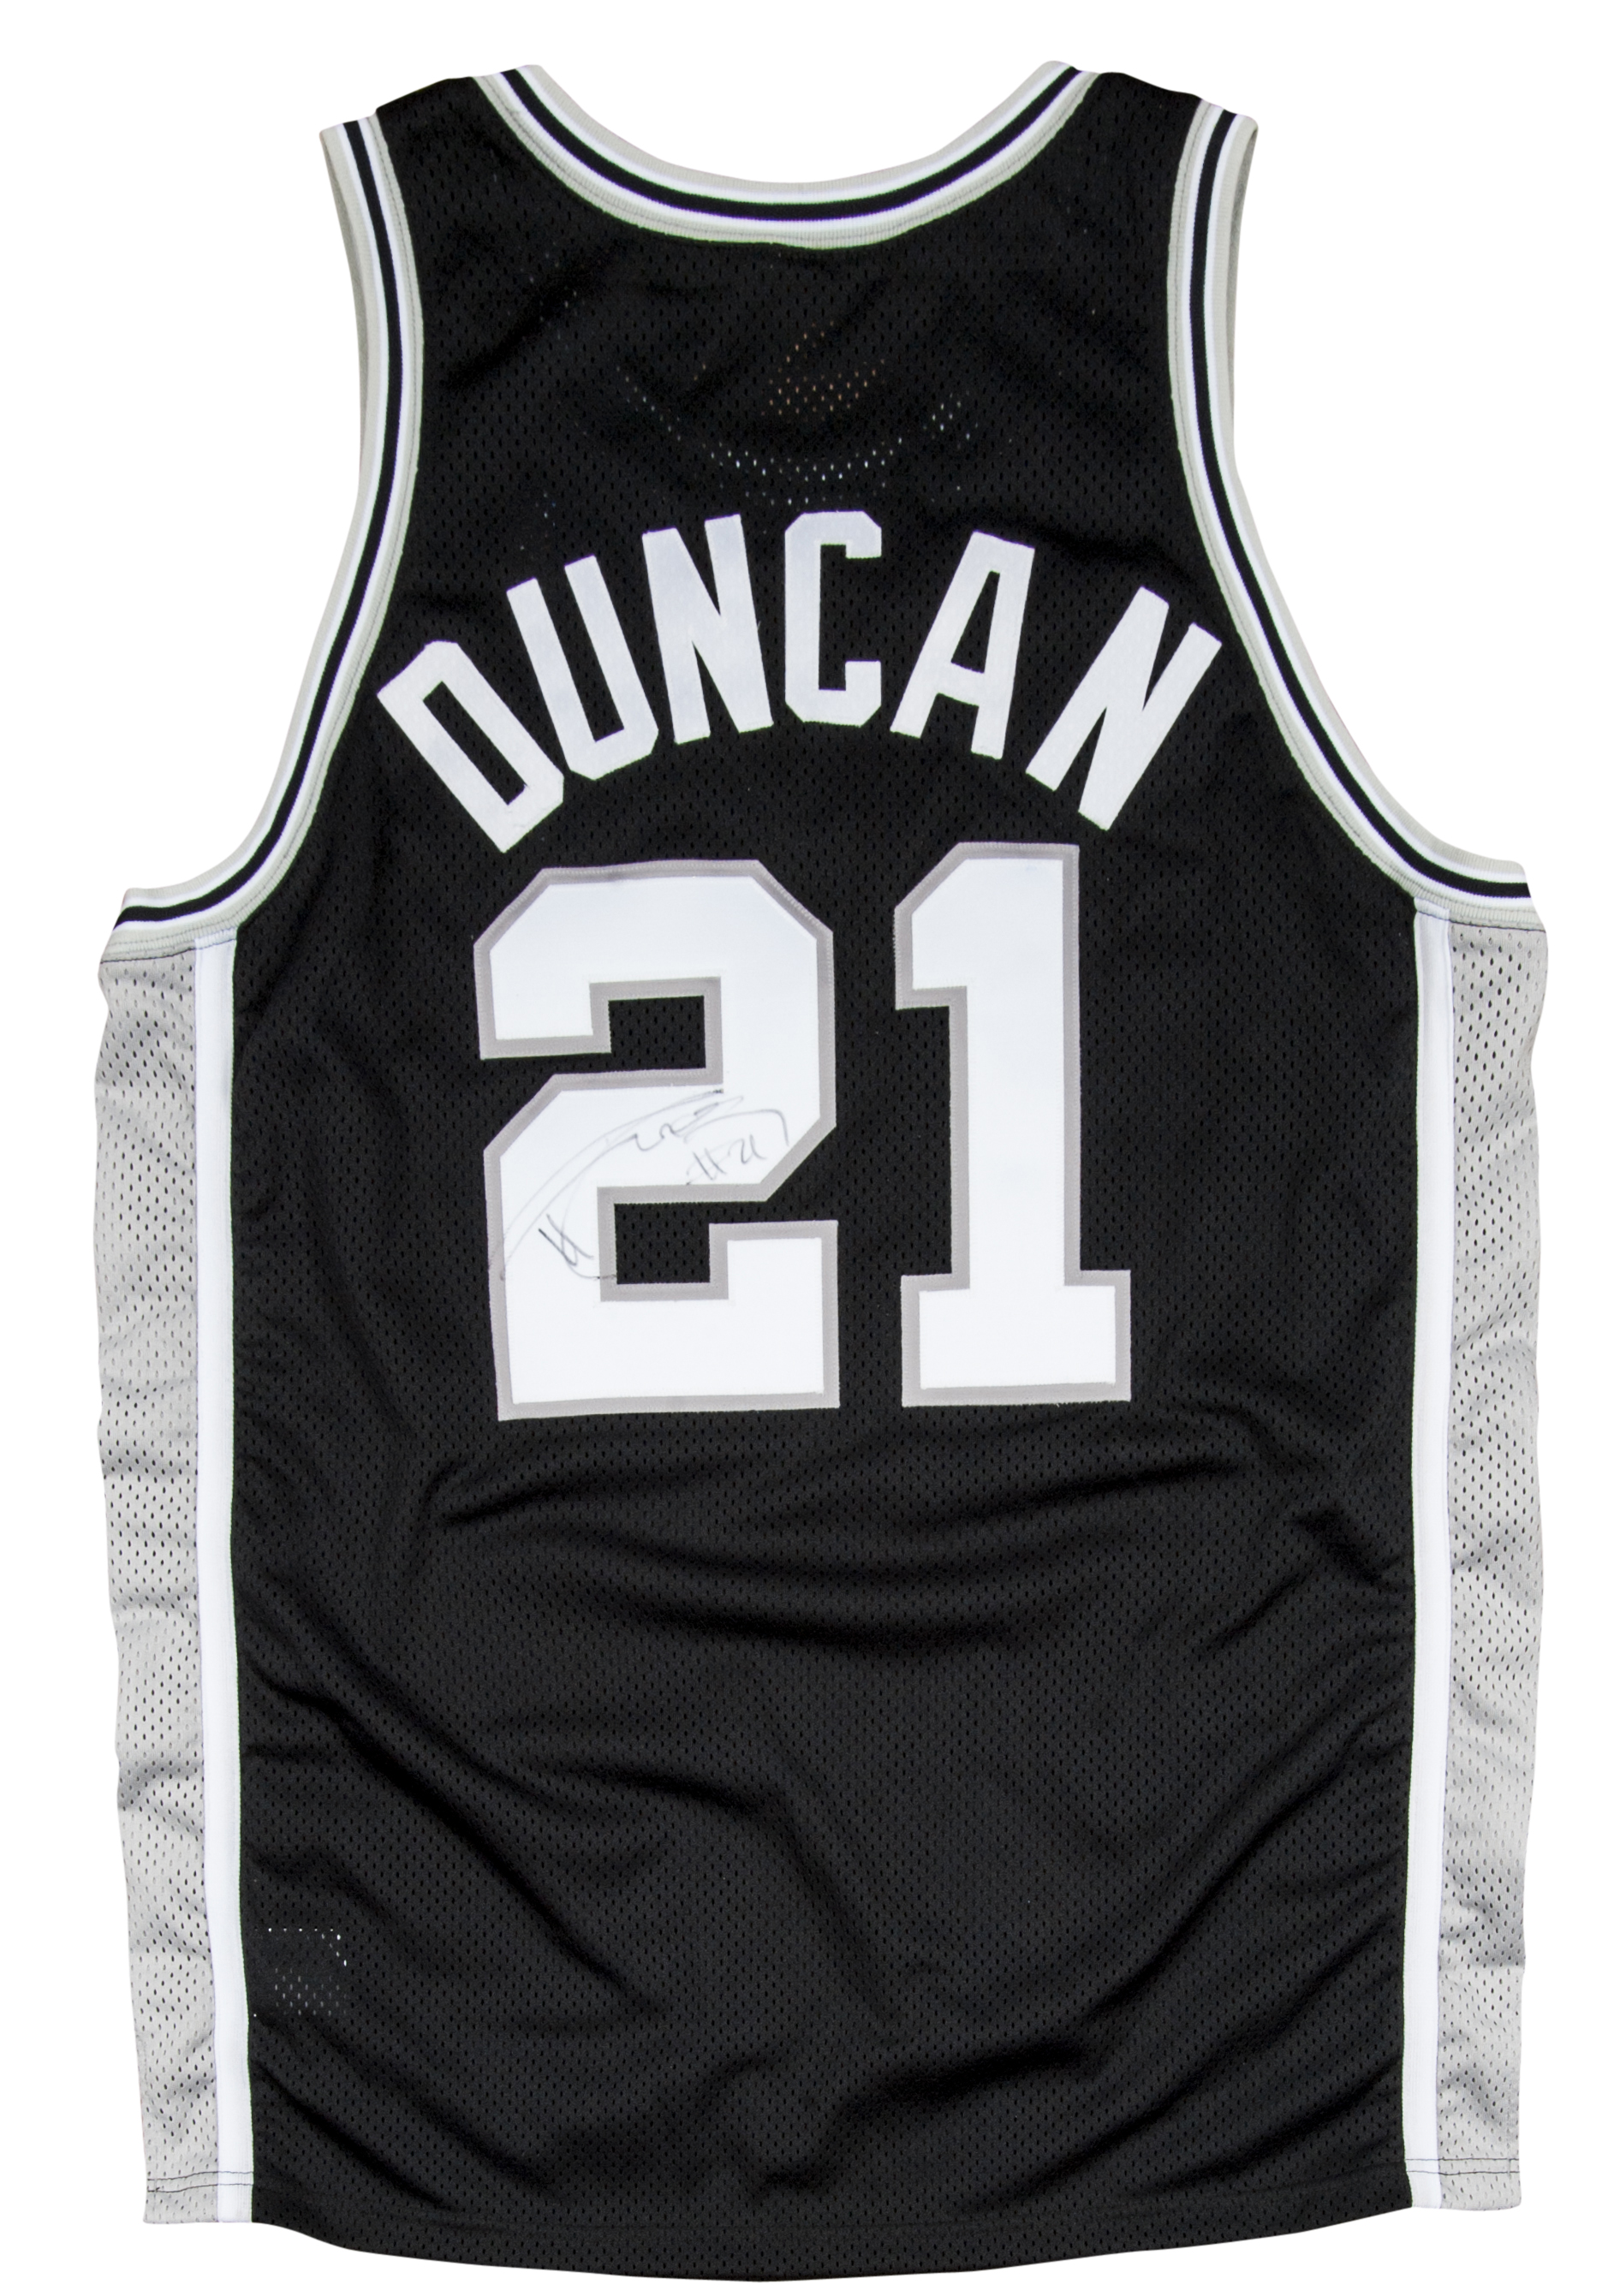 duncan tim jersey spurs 1997 san antonio rookie issued signed psa dna prev lot goldinauctions